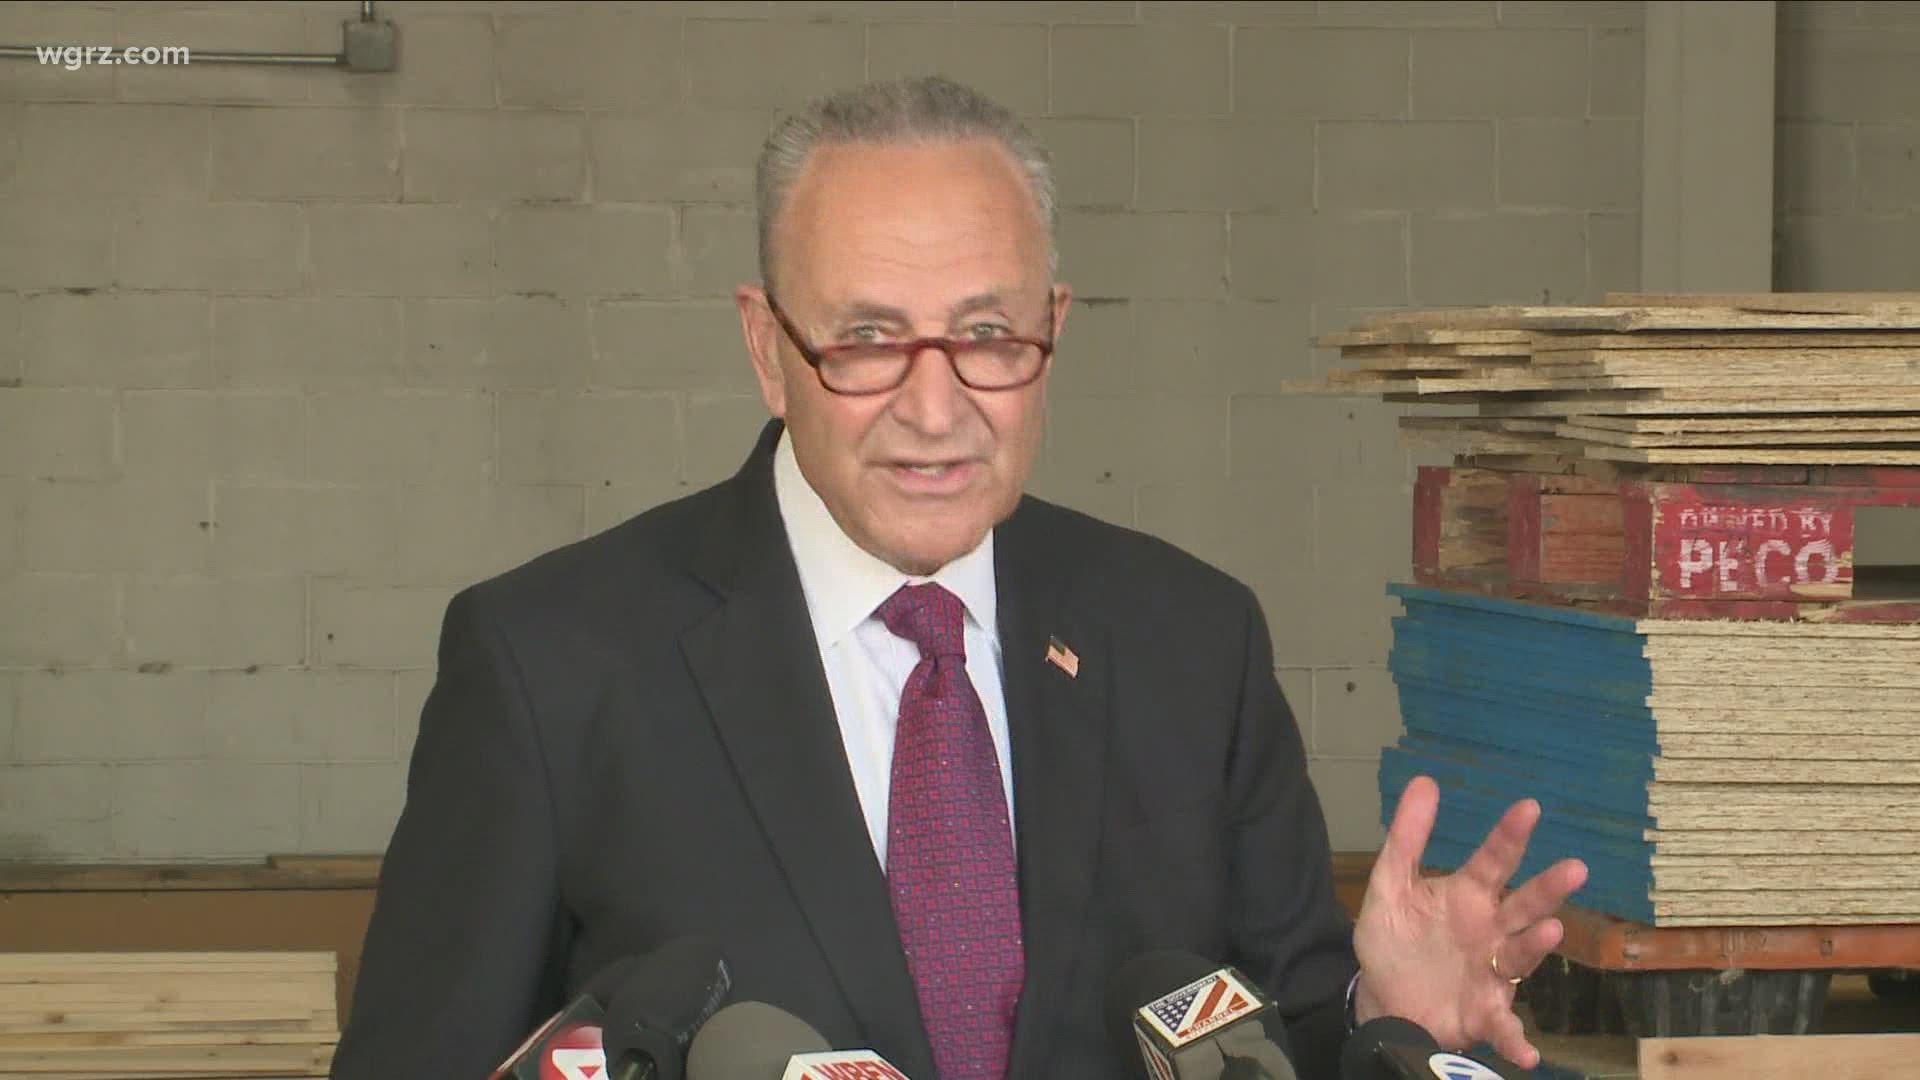 Schumer: 2 scoops of Paycheck Protection Program should be available to small businesses